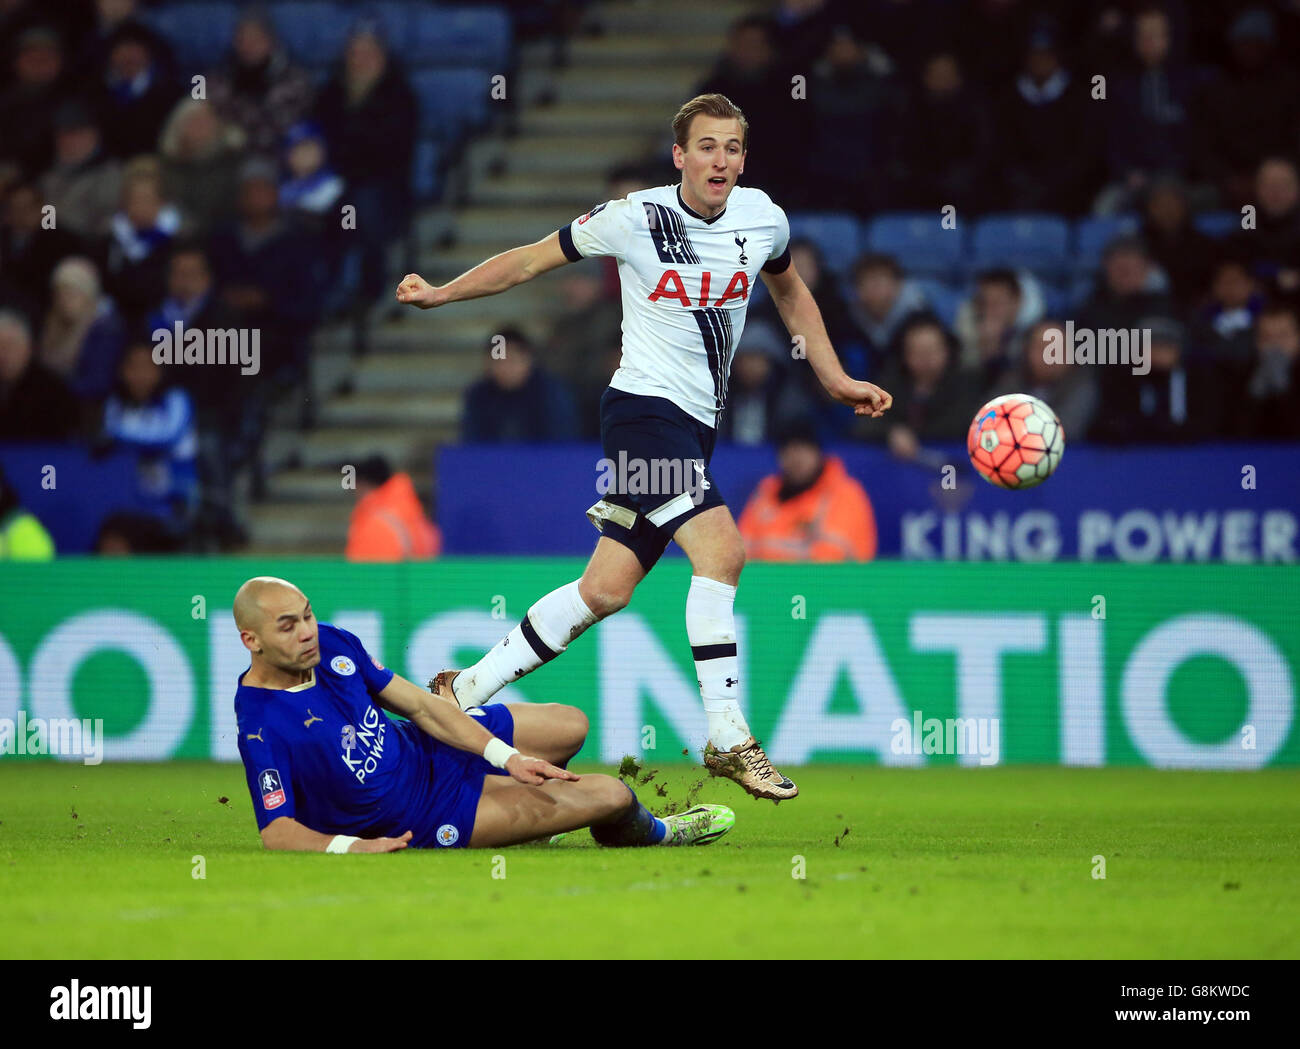 Leicester City v Tottenham Hotspur - Emirates FA Cup - Third Round Replay - King Power Stadium. Tottenham Hotspur's Harry Kane (right) has a shot at goal during the Emirates FA Cup, third round match at the King Power Stadium, Leicester. Stock Photo